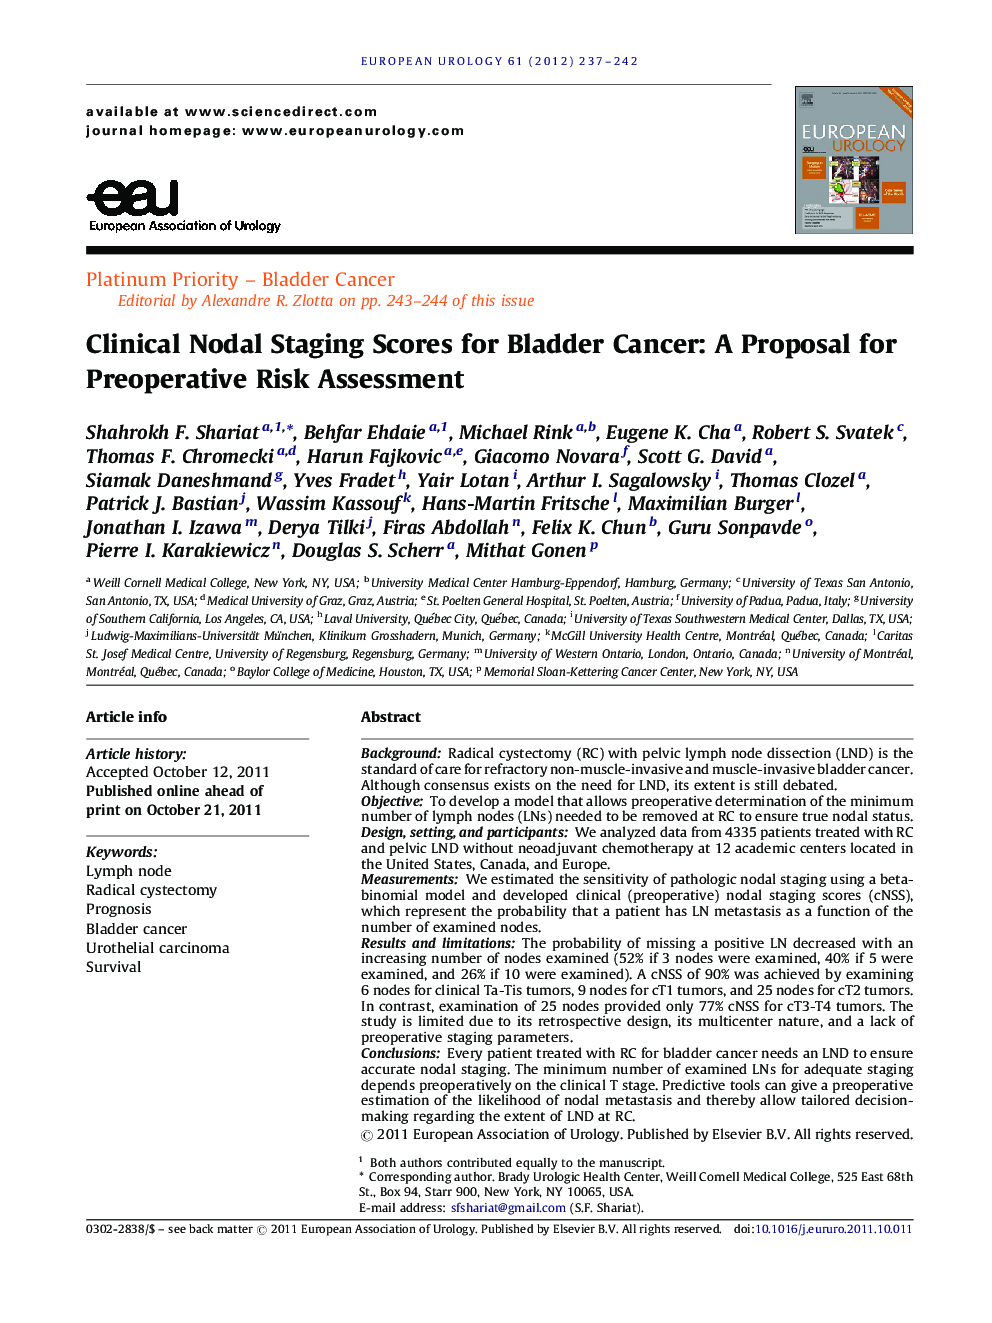 Clinical Nodal Staging Scores for Bladder Cancer: A Proposal for Preoperative Risk Assessment